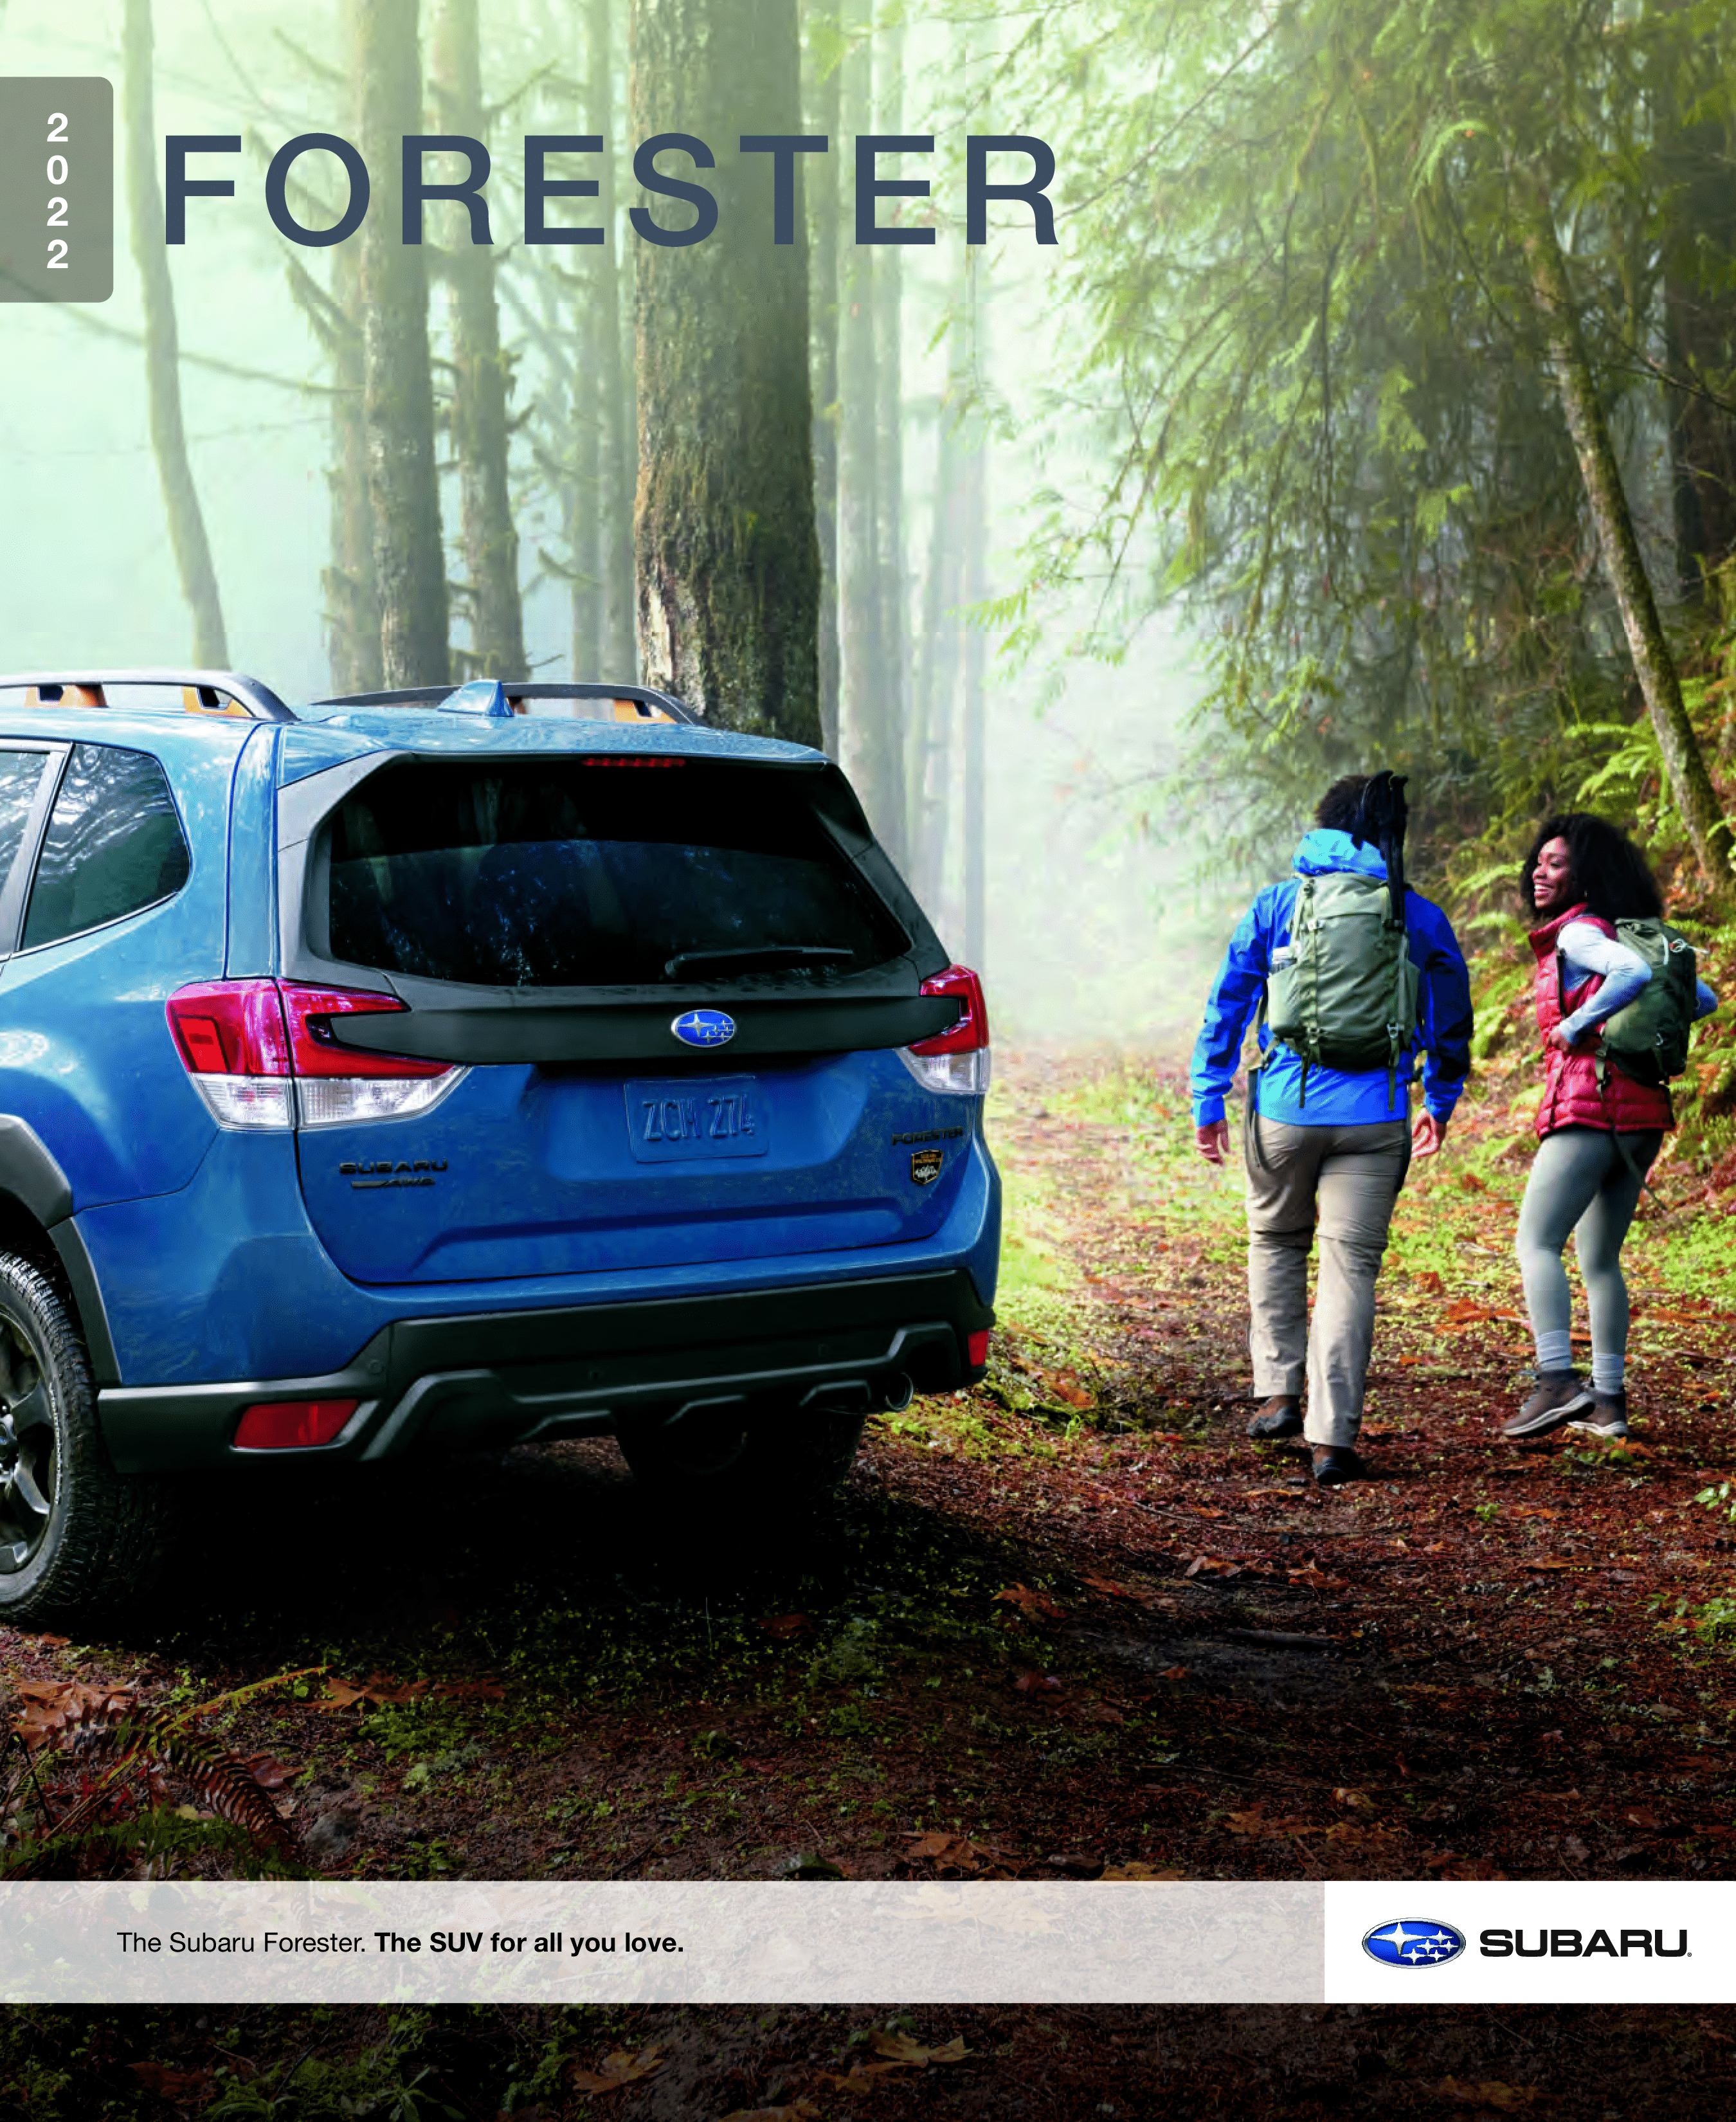 2022 Forester image with link to brochure.